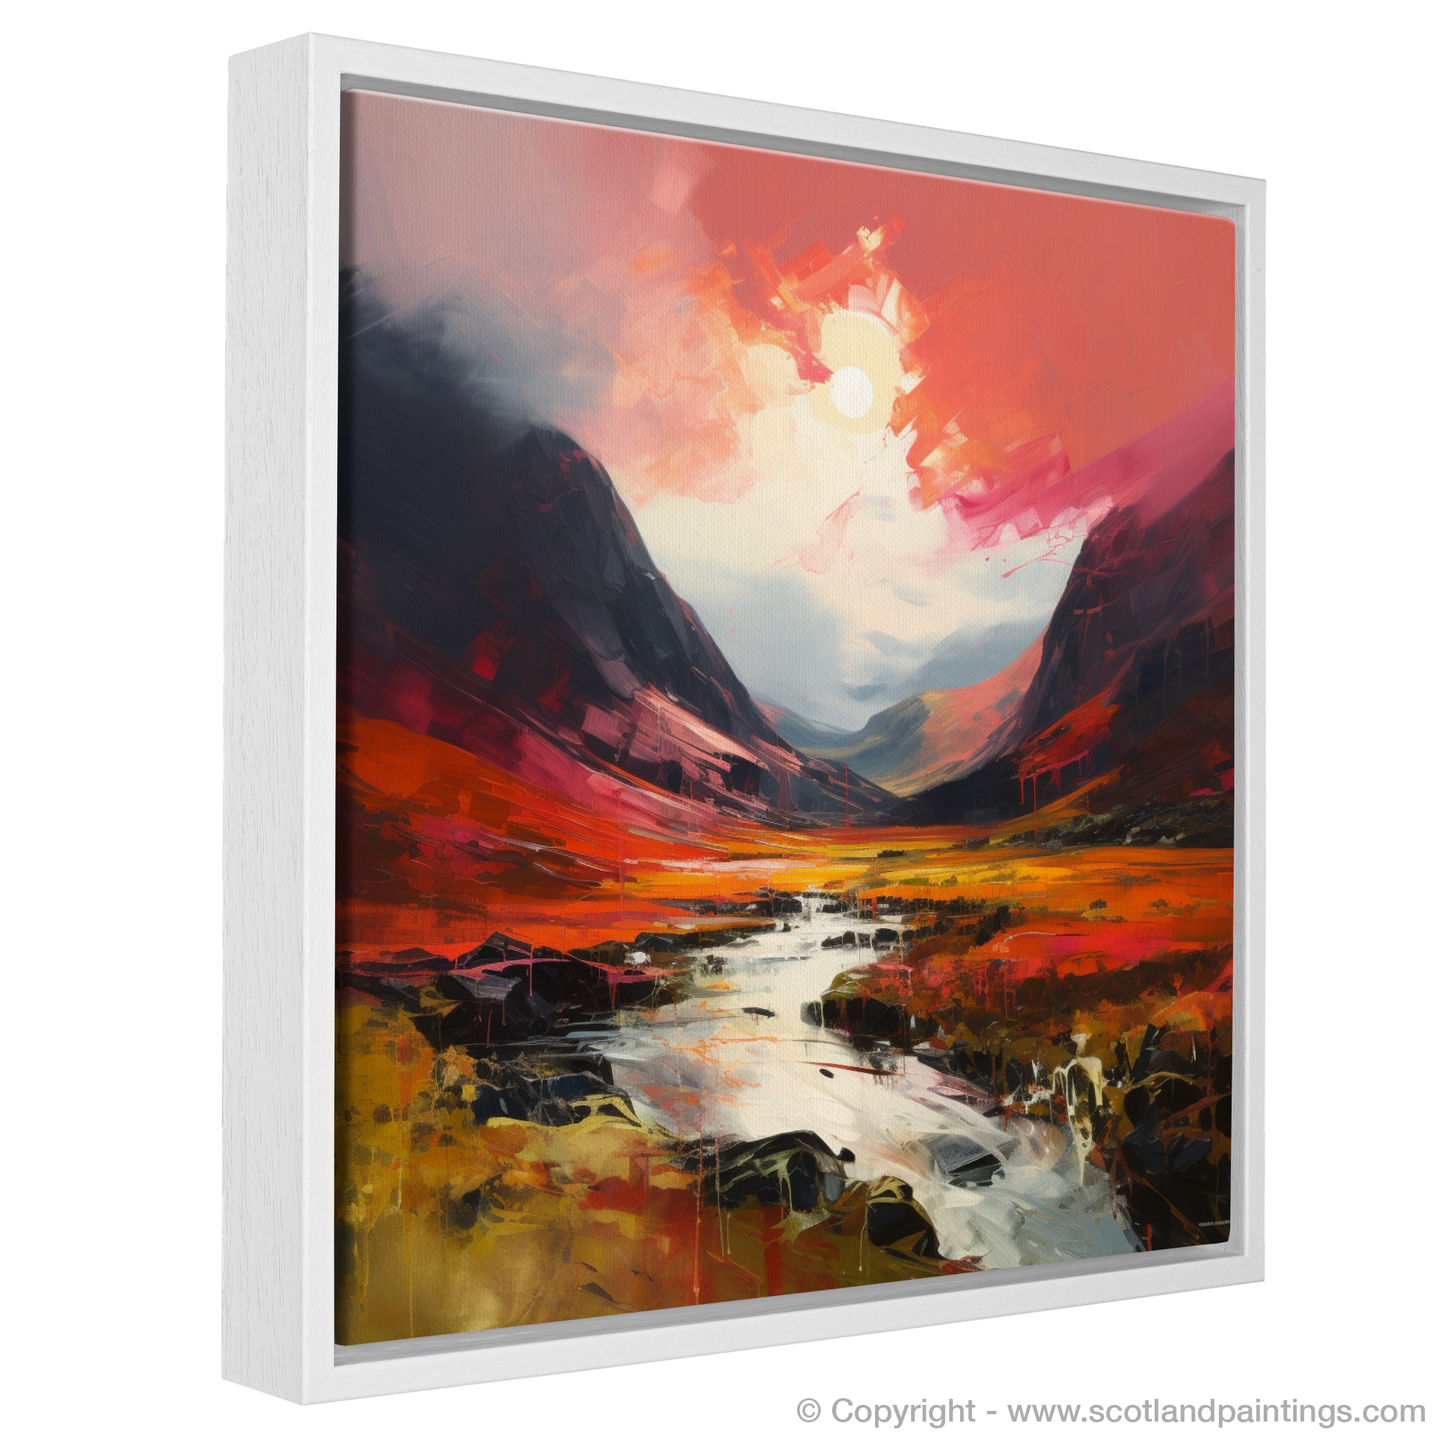 Painting and Art Print of Crimson clouds over valley in Glencoe entitled "Crimson Skies Over Glencoe Valley".